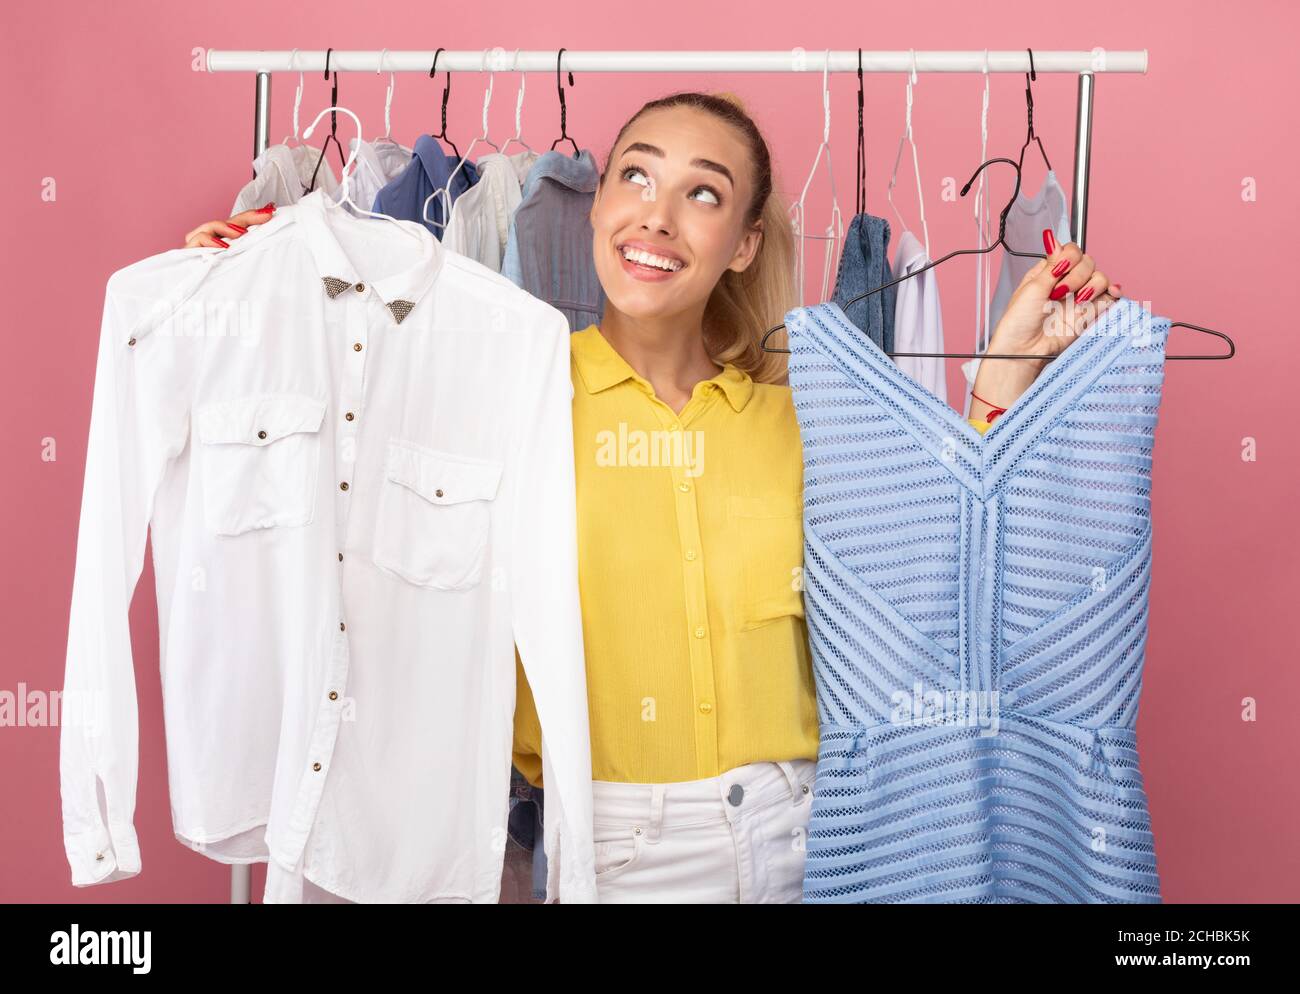 Young woman holding hangers with dress and shirt Stock Photo - Alamy